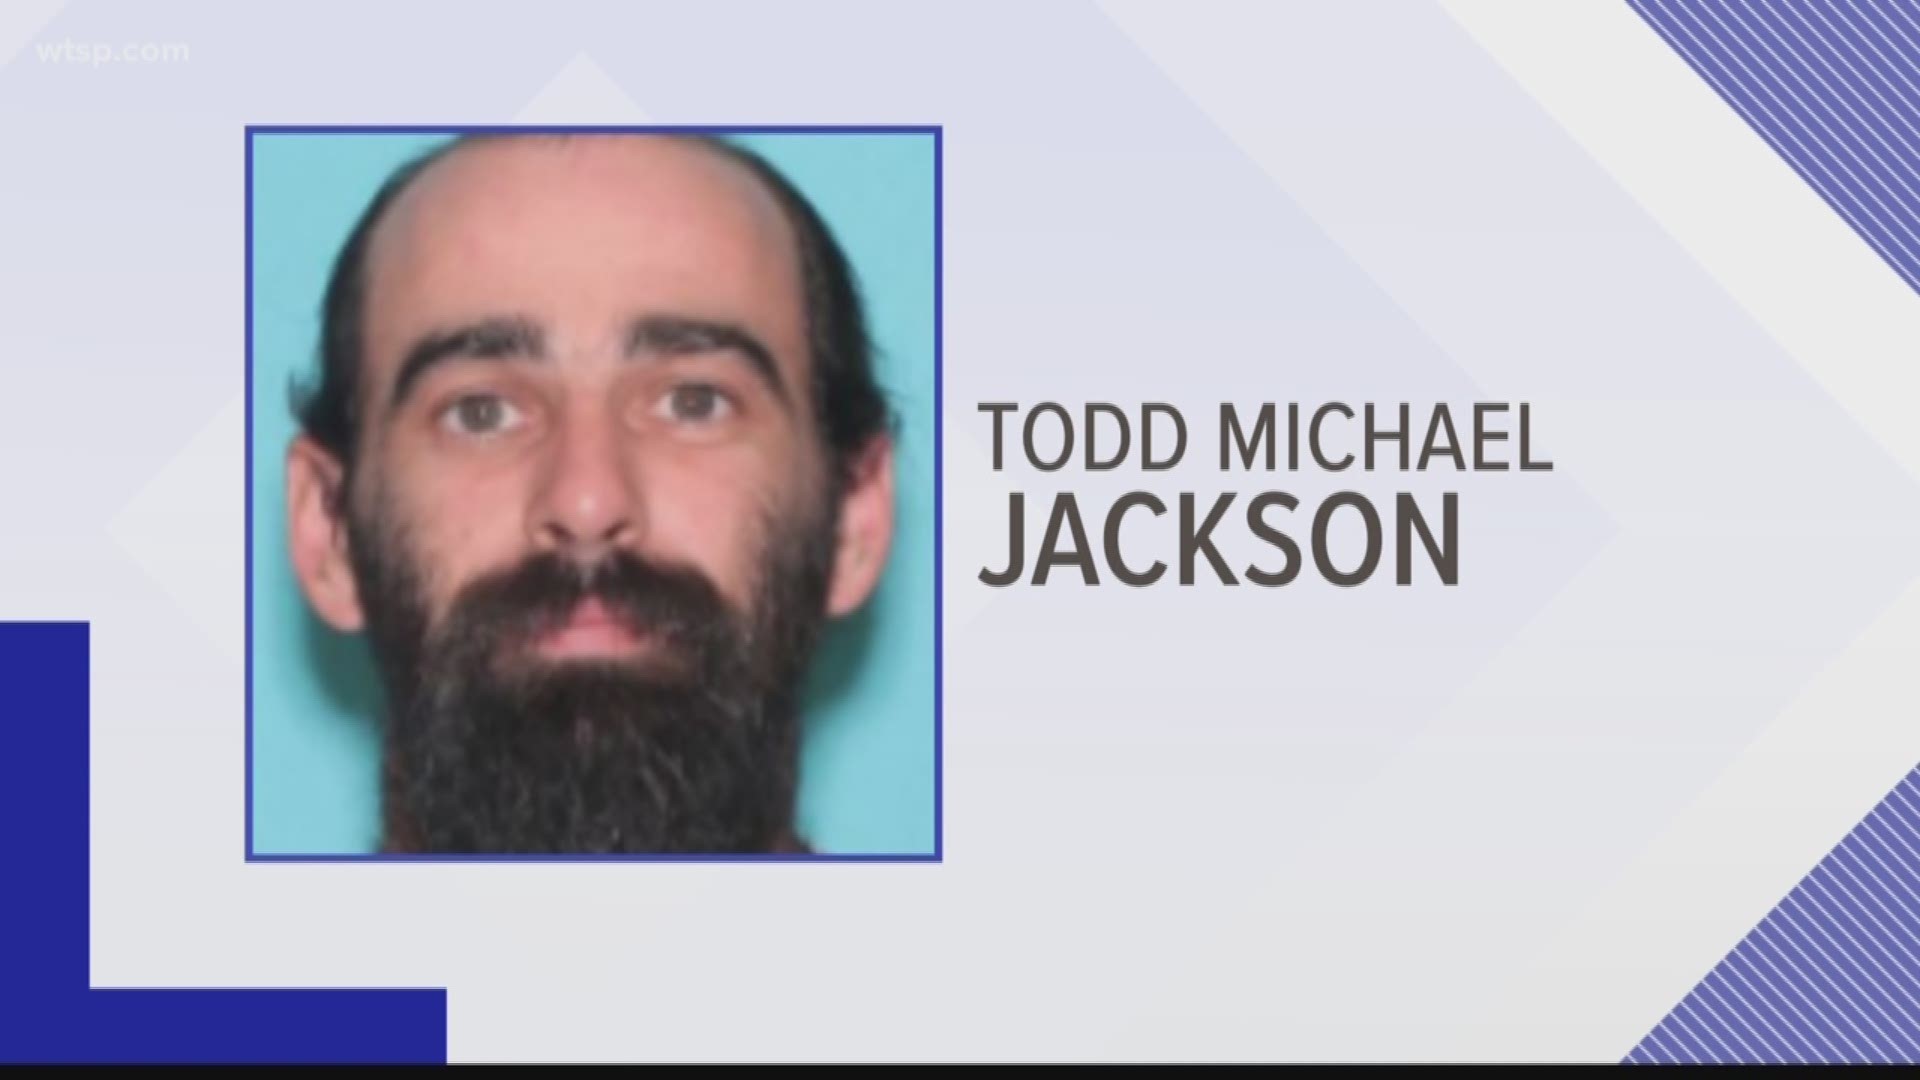 The Polk County Sheriff's Office said Todd Michael Jackson, 34,  was arrested at a home in the Wabash area of Lakeland Saturday night.